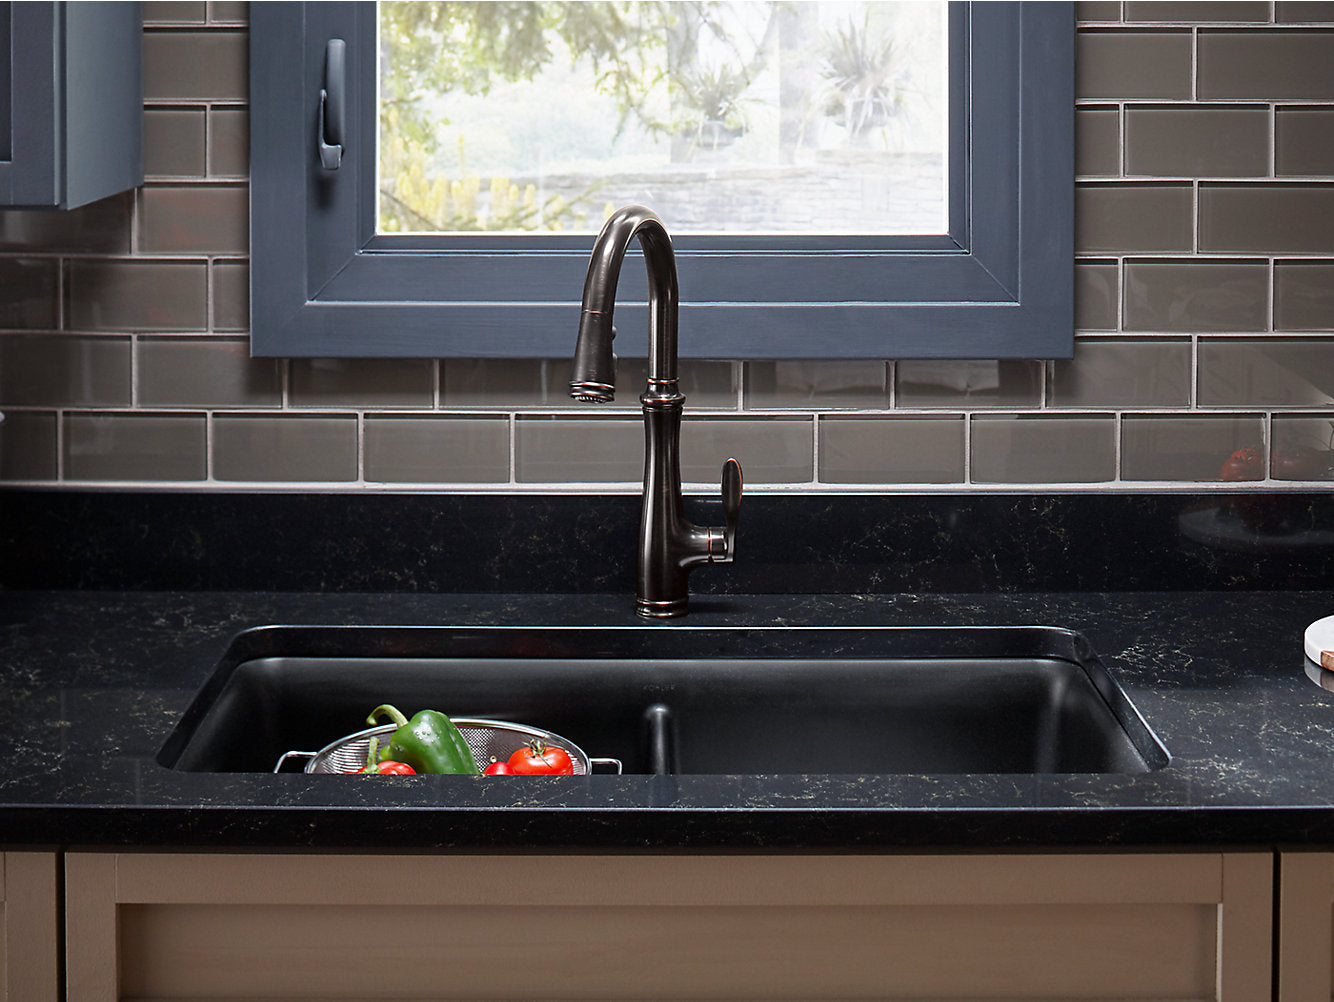 Kohler Bellera Single Hole or Three Hole Kitchen Sink Faucet With Pull Down 16-3/4" Spout and Right Hand Lever Handle Docknetik Magnetic Docking System, and a 3 Function Sprayhead Featuring Sweep Spray- Oil-Rubbed Bronze